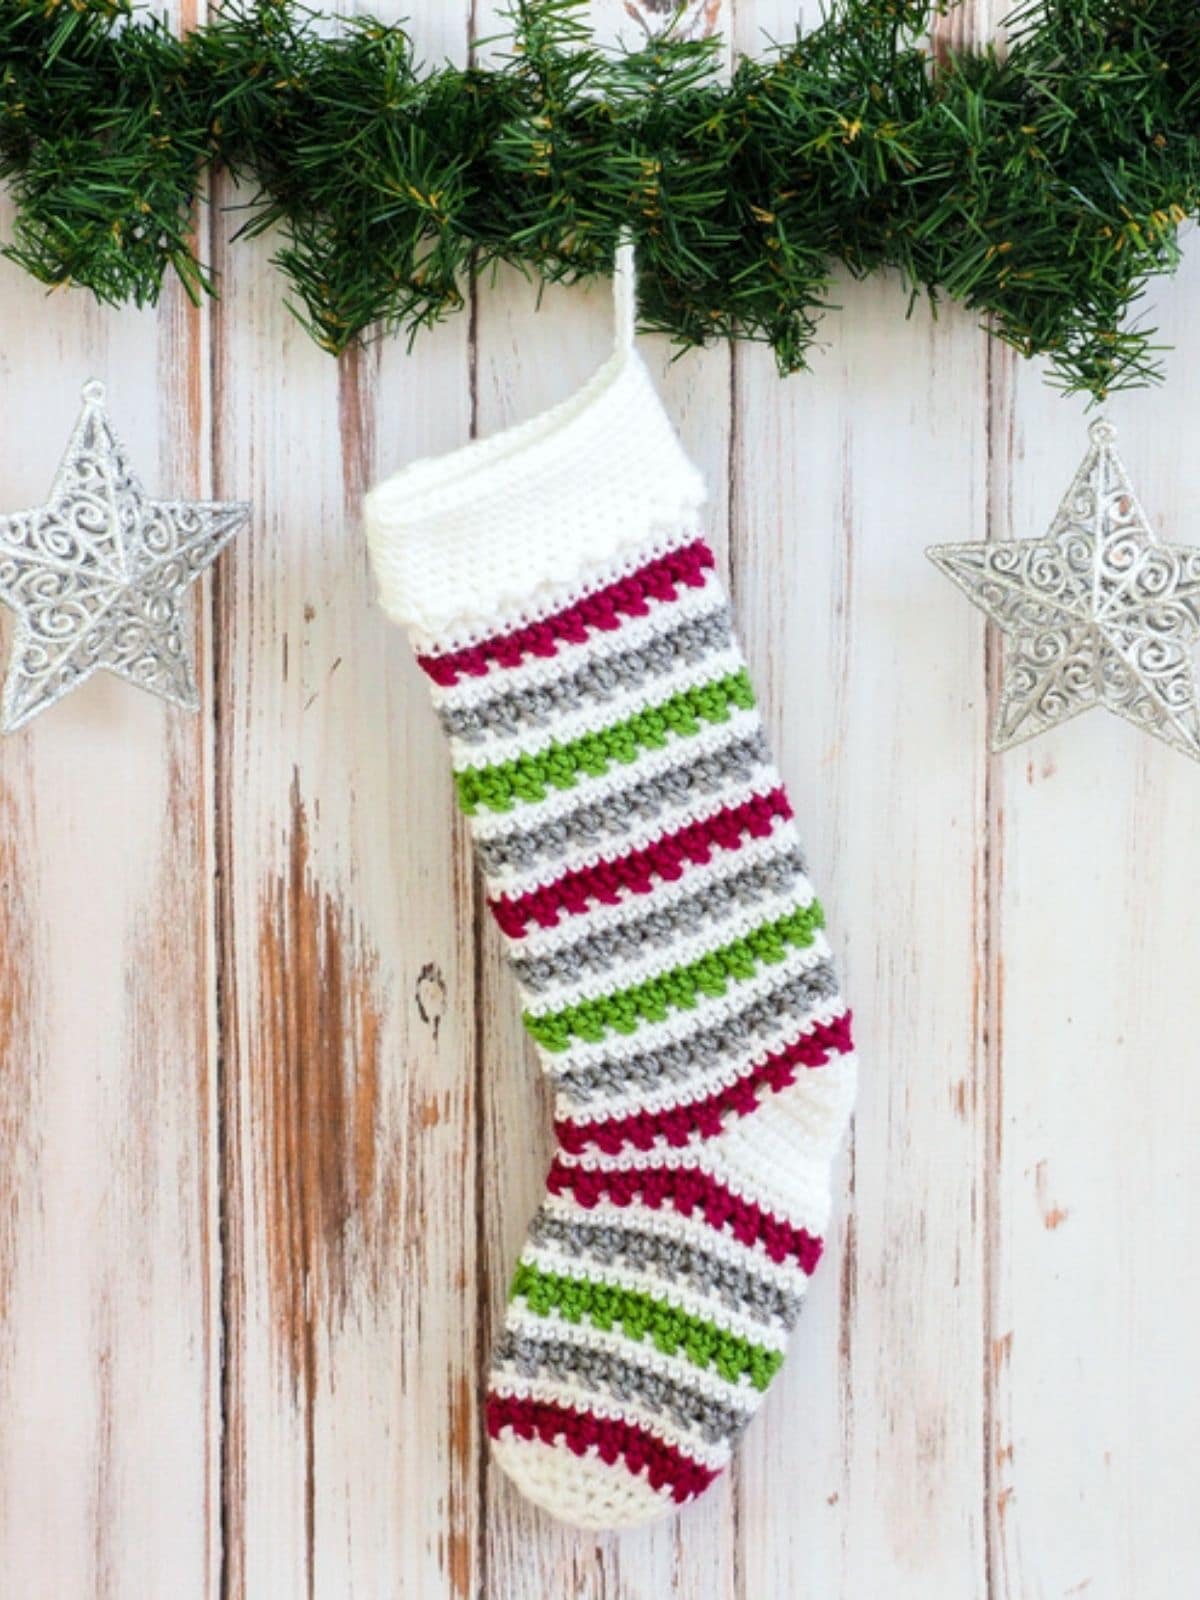 White, red, green, and gray striped crochet Christmas stocking hanging from pine with two star decorations on a pale wooden background. 